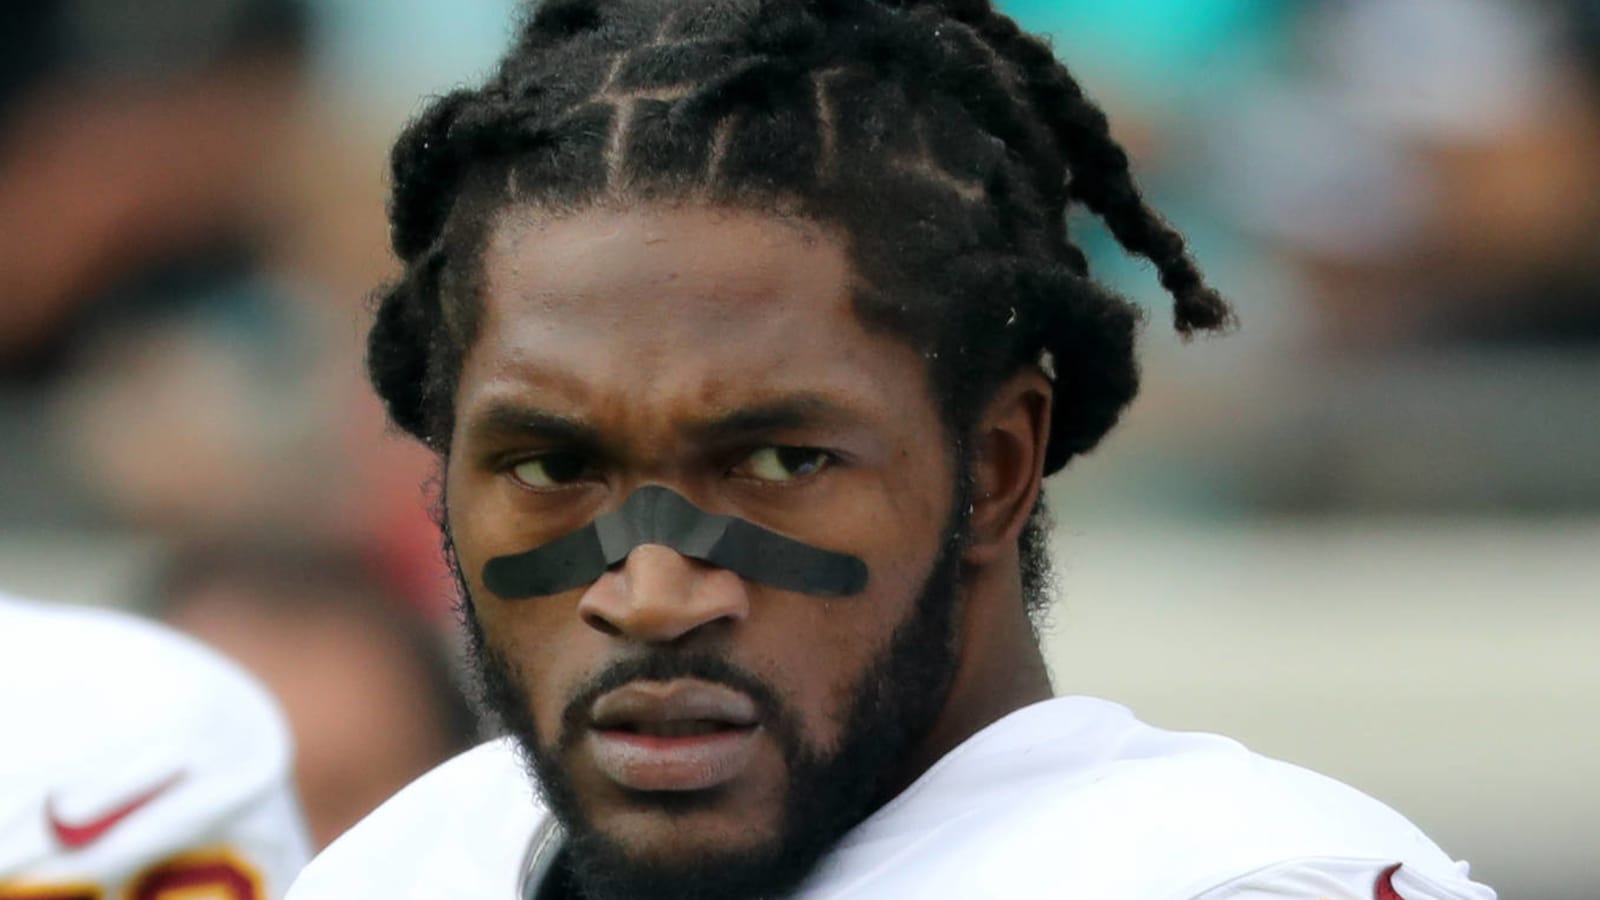 D.J. Swearinger aims to expose Jay Gruden with text-message conversation